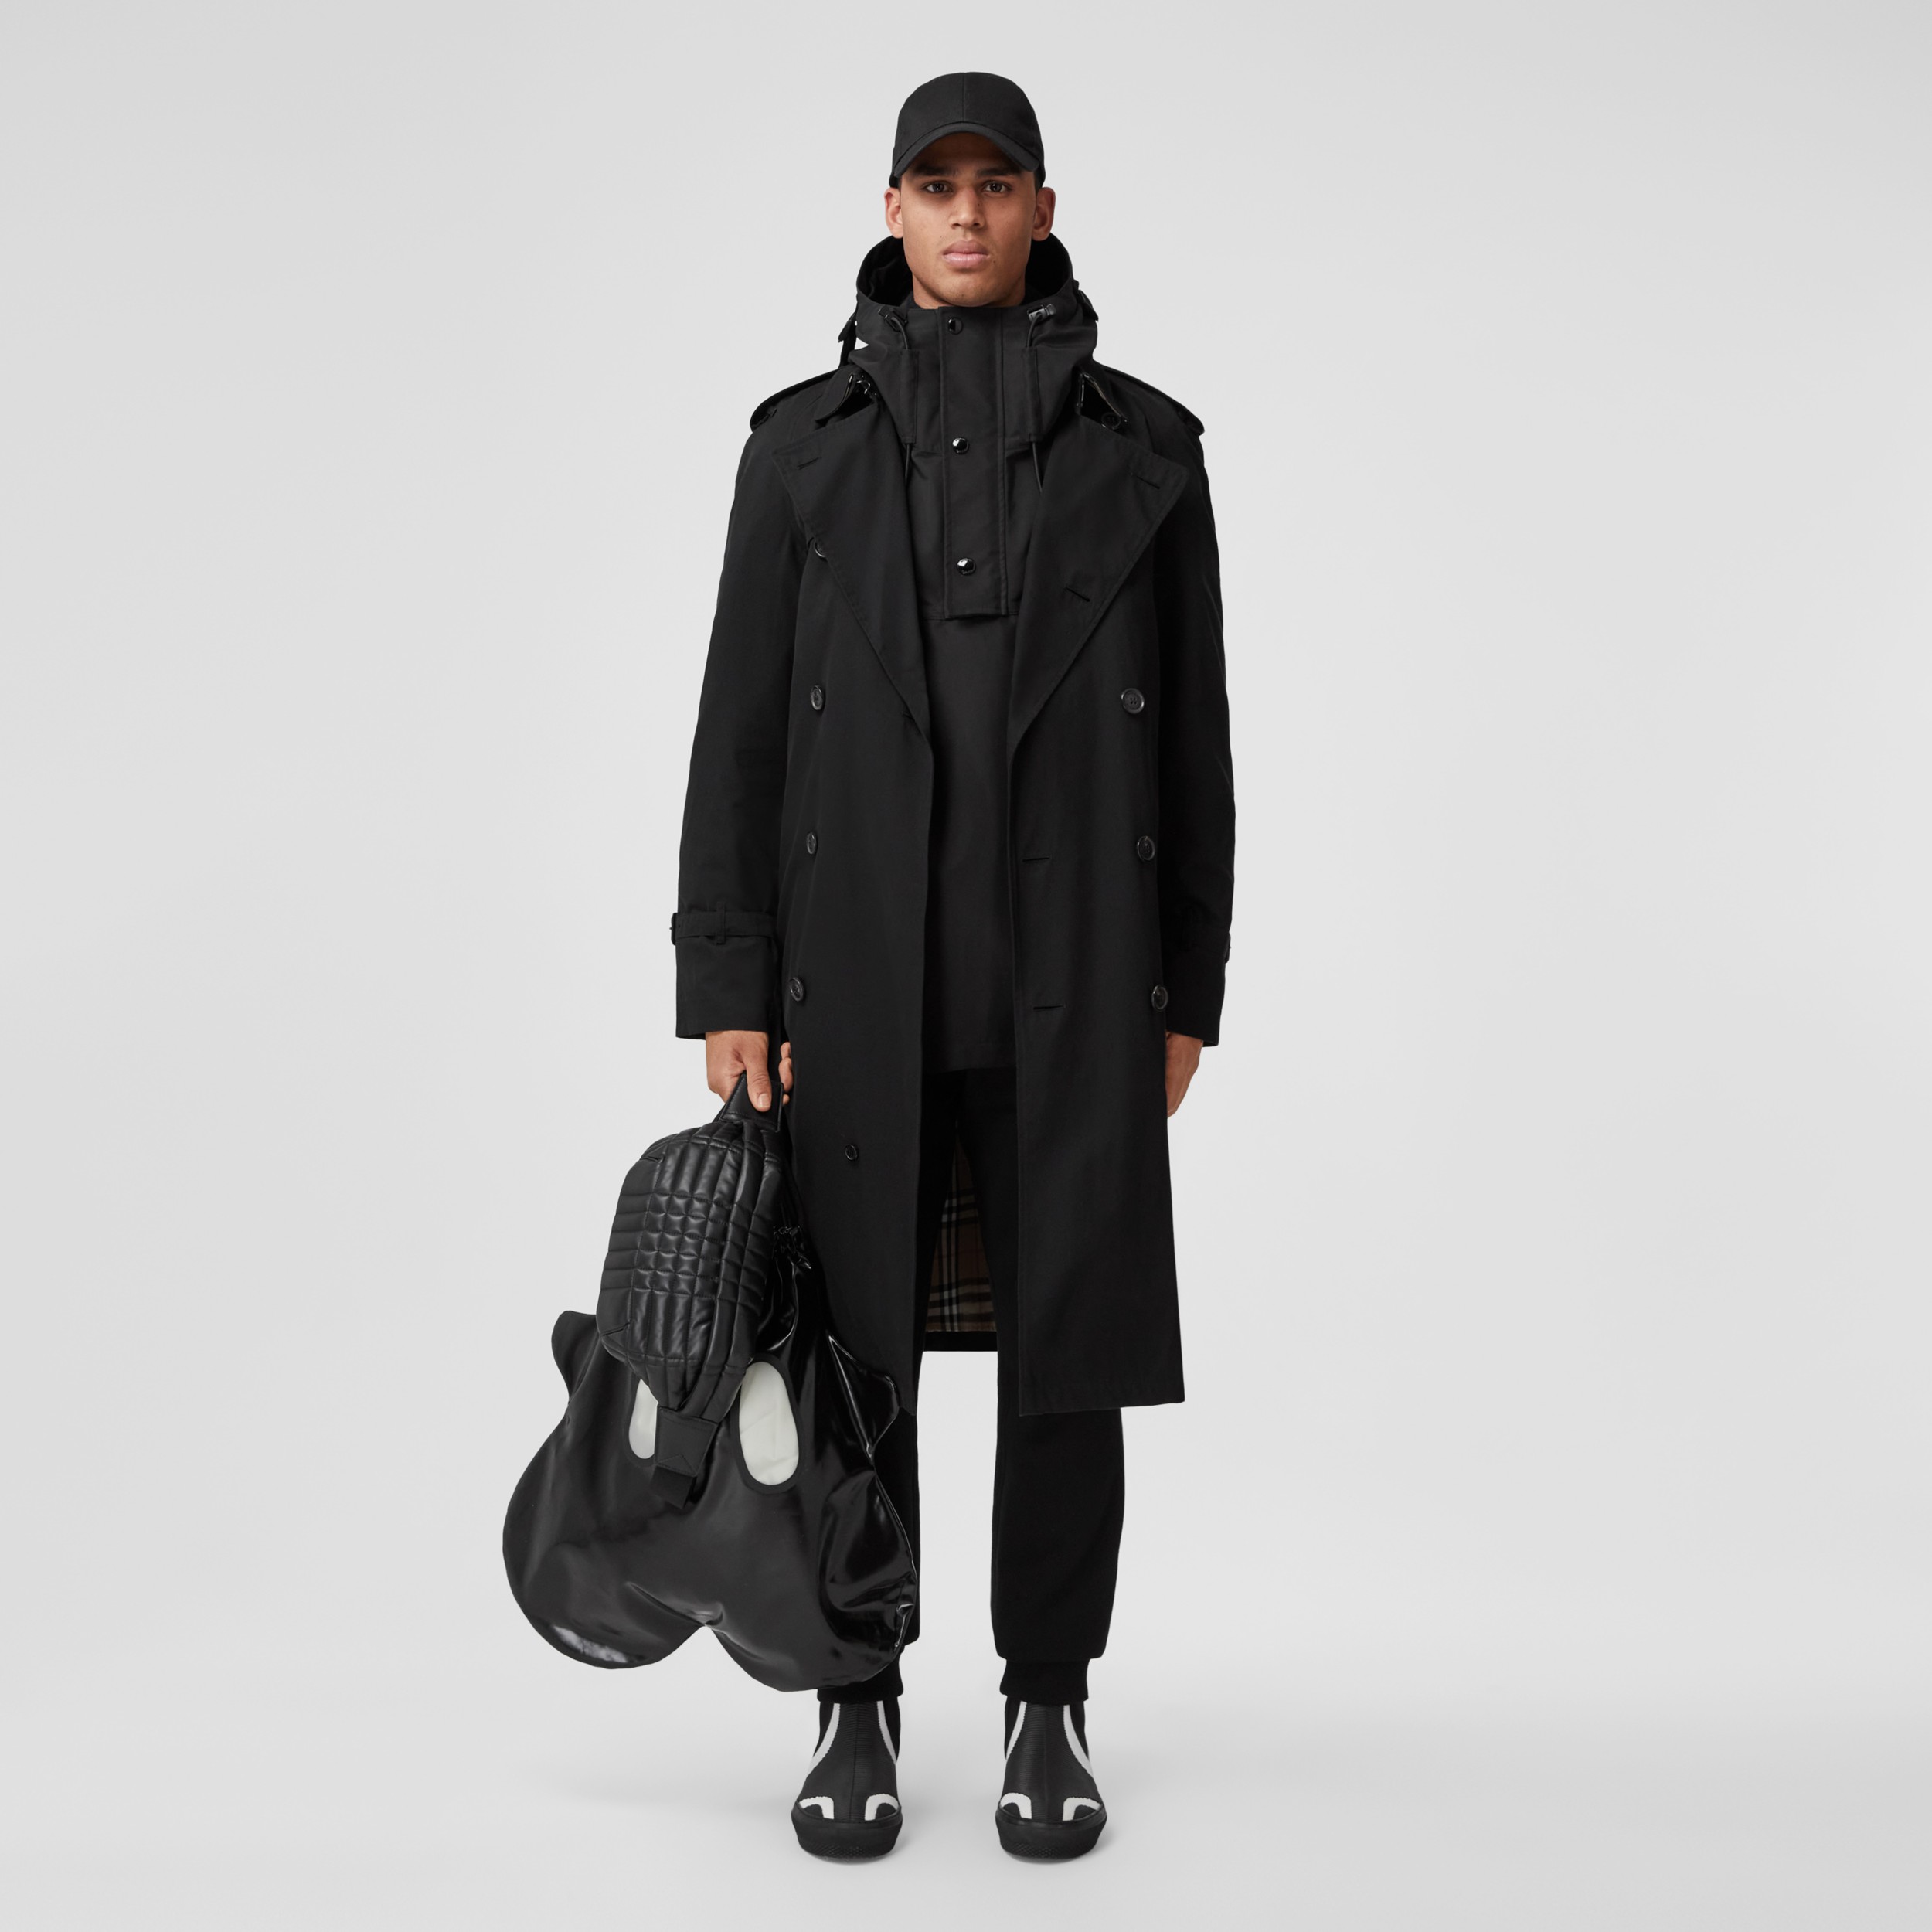 Ni saltet telefon The Westminster Heritage Trench Coat in Black - Men | Burberry® Official